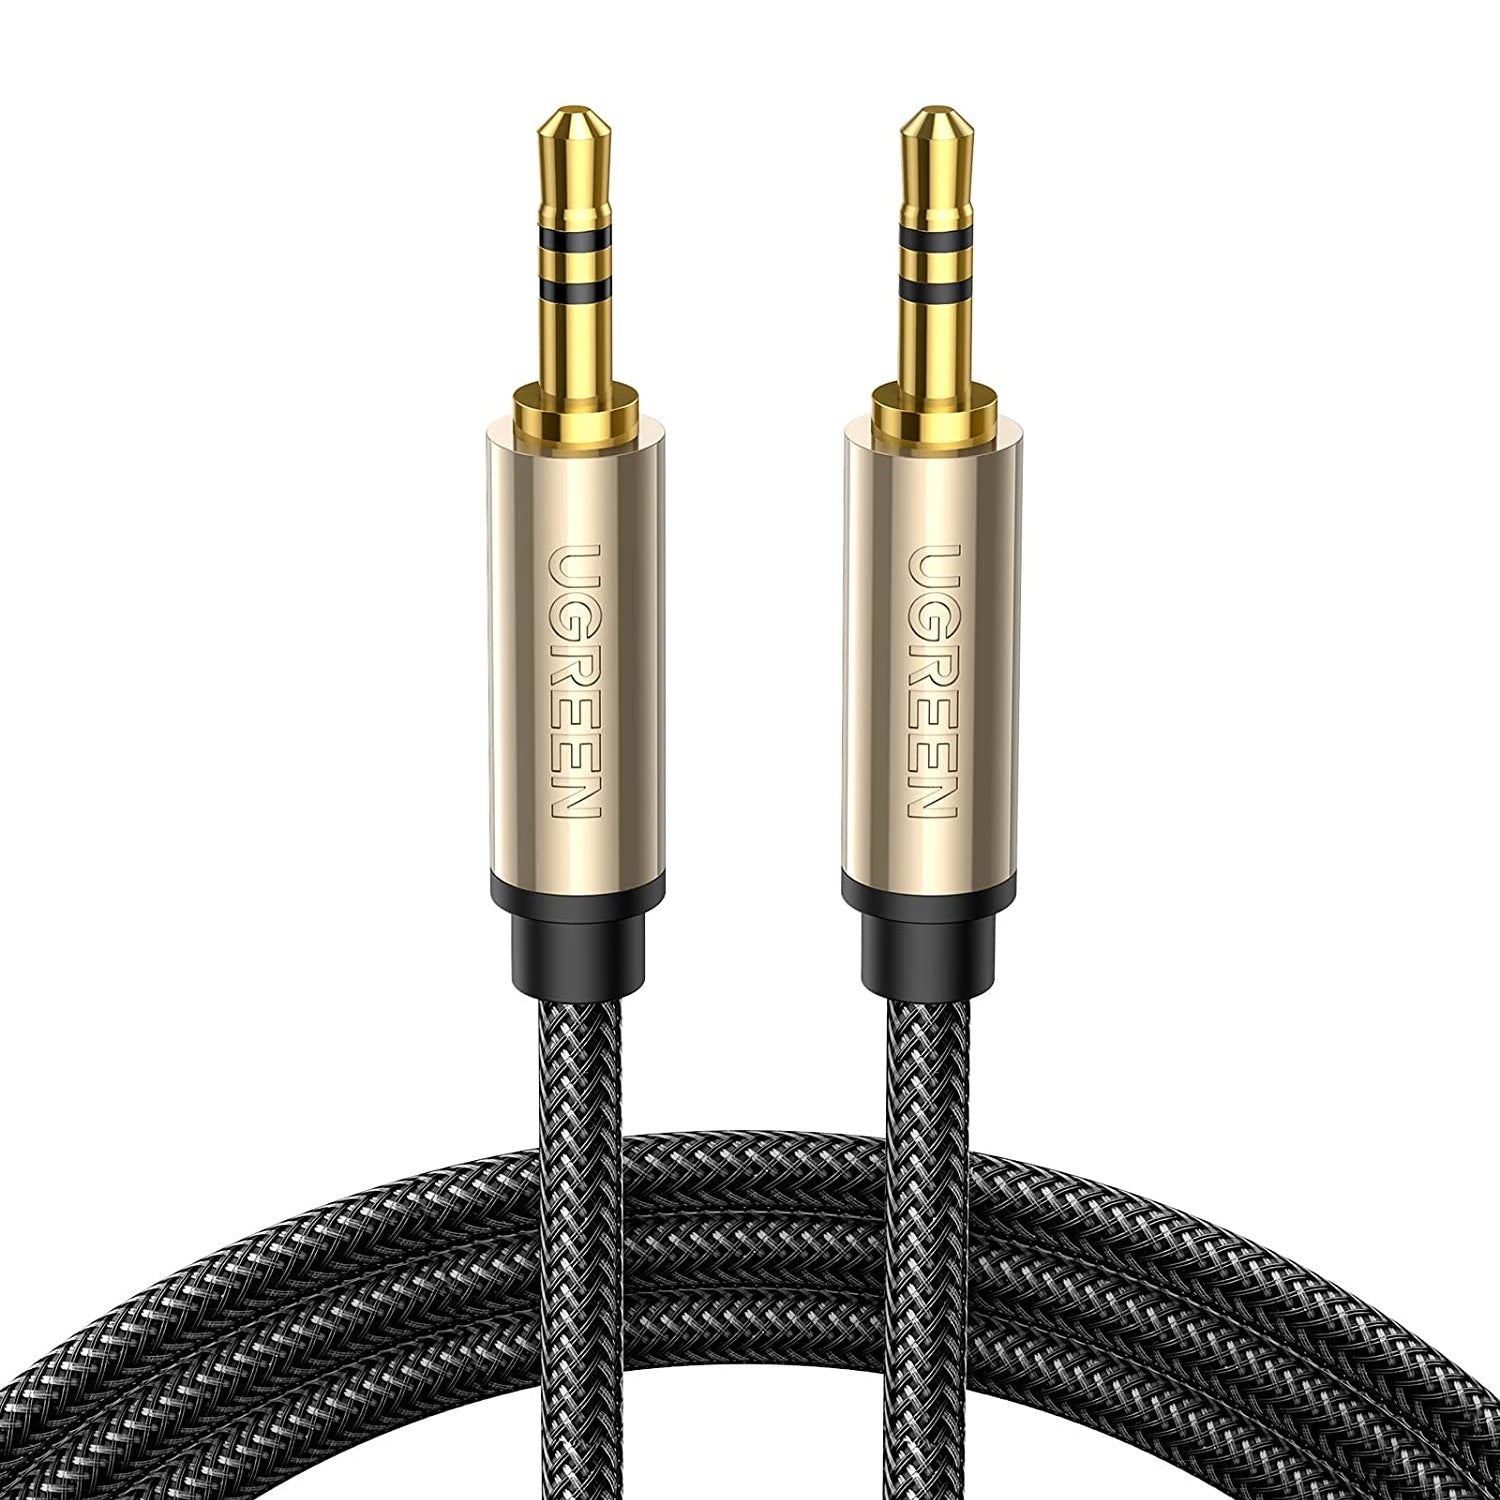 UGREEN 3.5mm Audio Cable AUX Cord Male to Male Hi-Fi Sound - Long Length 10m 15m 20m